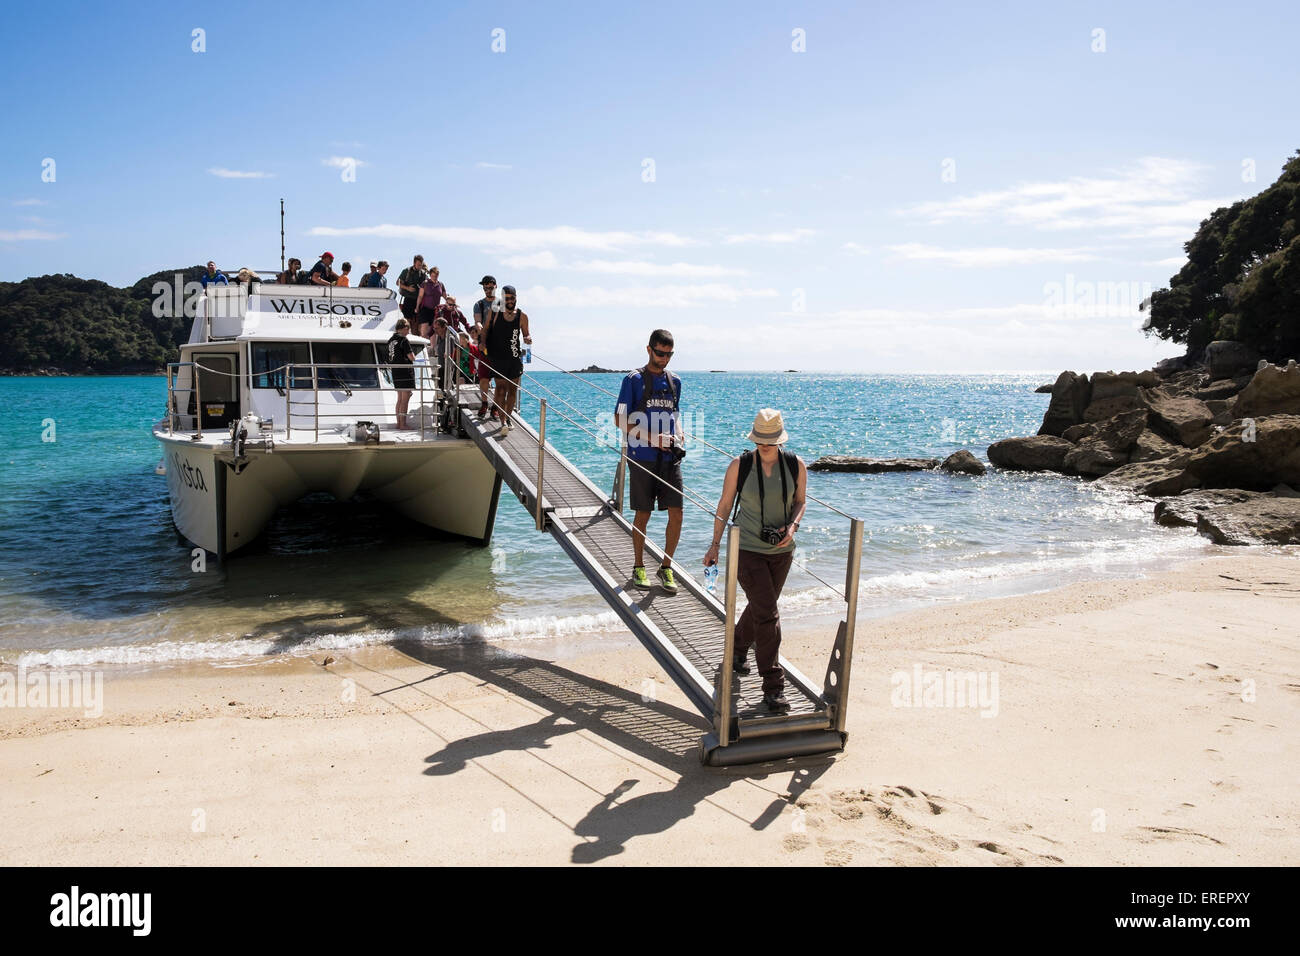 Passengers disembarking from the Wilsons water taxi onto Medlands beach to start along part of the Abel Tasman walk in New zeala Stock Photo